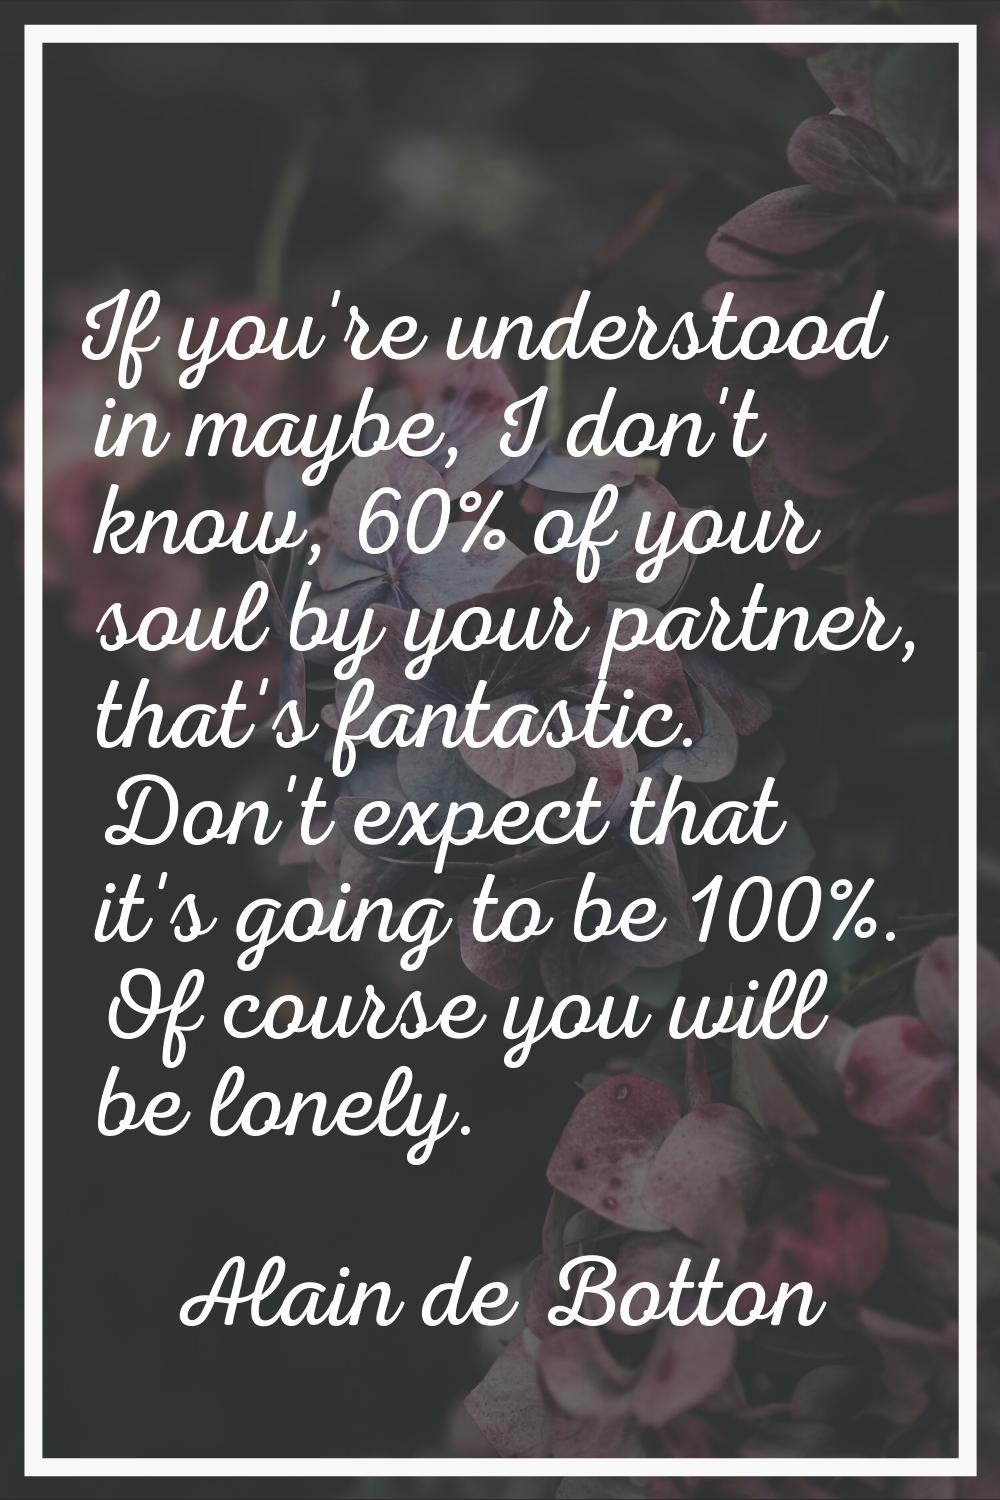 If you're understood in maybe, I don't know, 60% of your soul by your partner, that's fantastic. Do